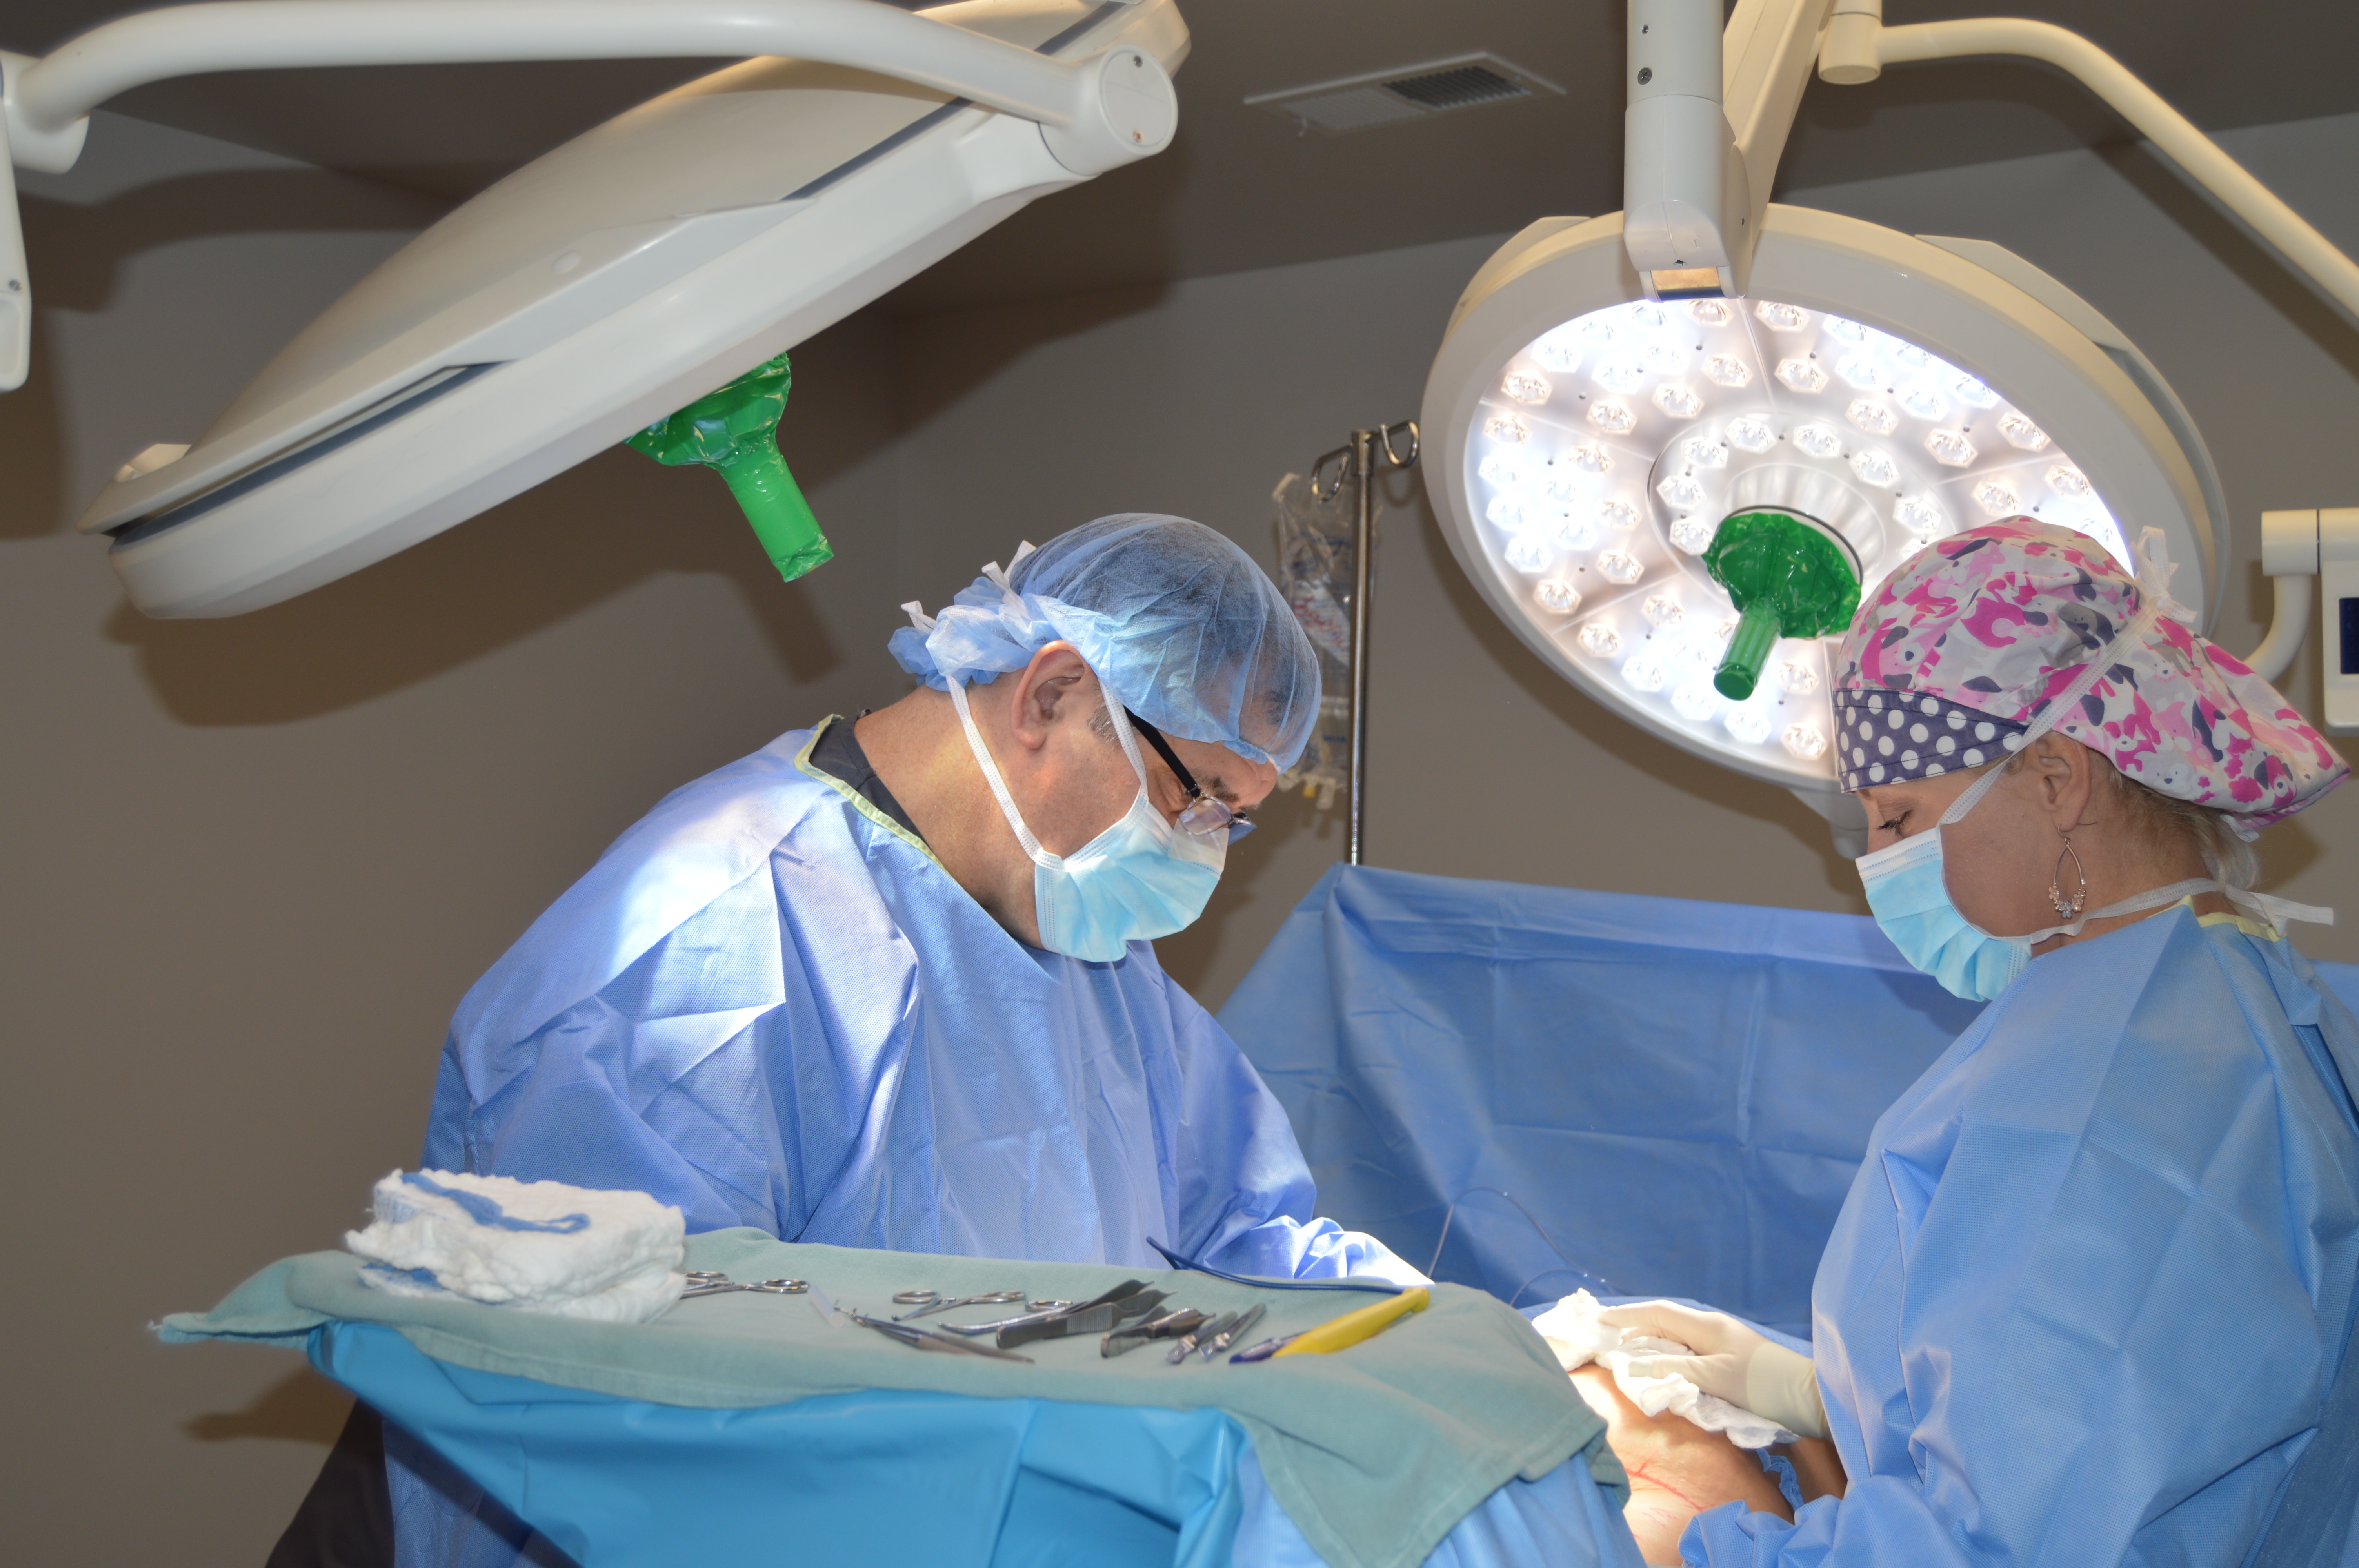 Two surgeons in a room with lights and equipment.